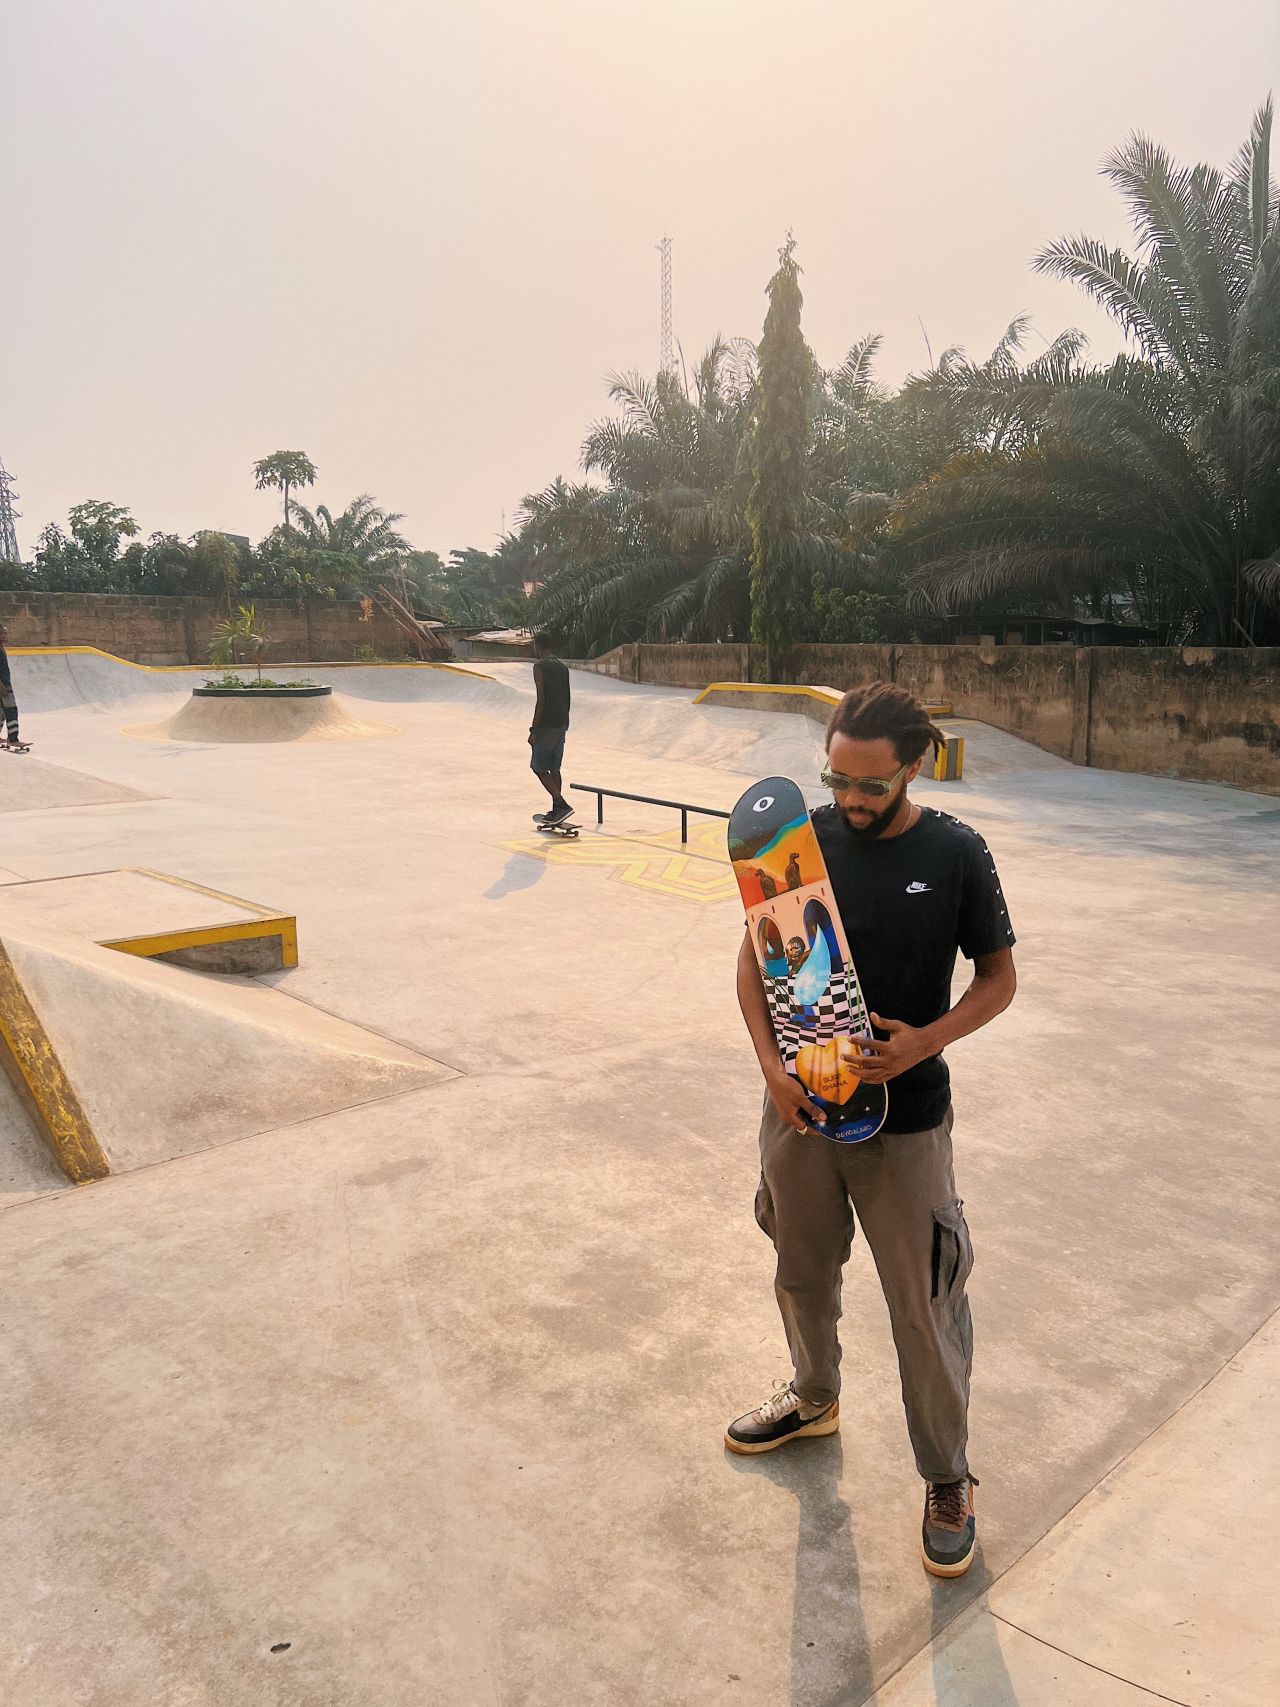 David Alabo (pictured) holds one of his limited edition skateboard designs at the recently opened Freedom Skate Park in Accra, Ghana. 